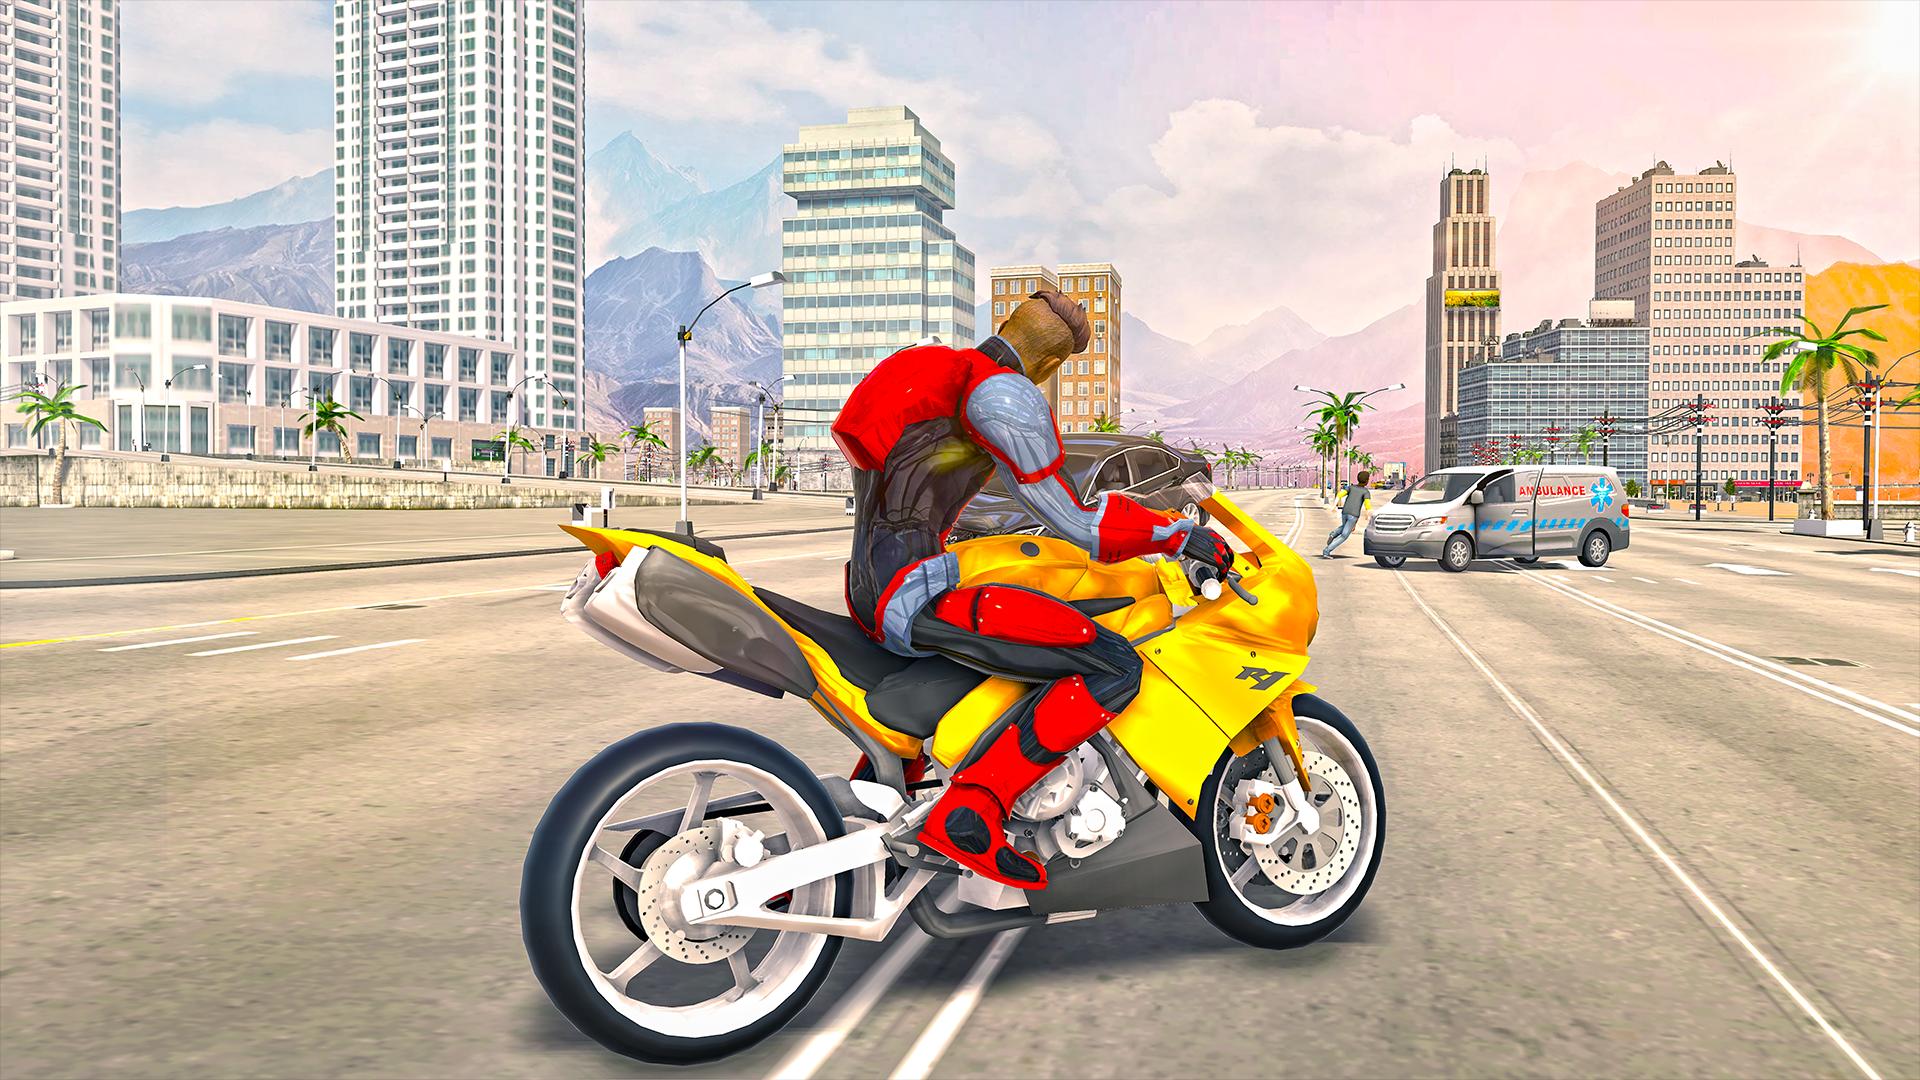 Bike drive игра. Заставки игр про мотобайк ps2. Bike Racing Android game jpg. Motorcycle game PC best Graphics. Indian Bikes Driver 3d games.